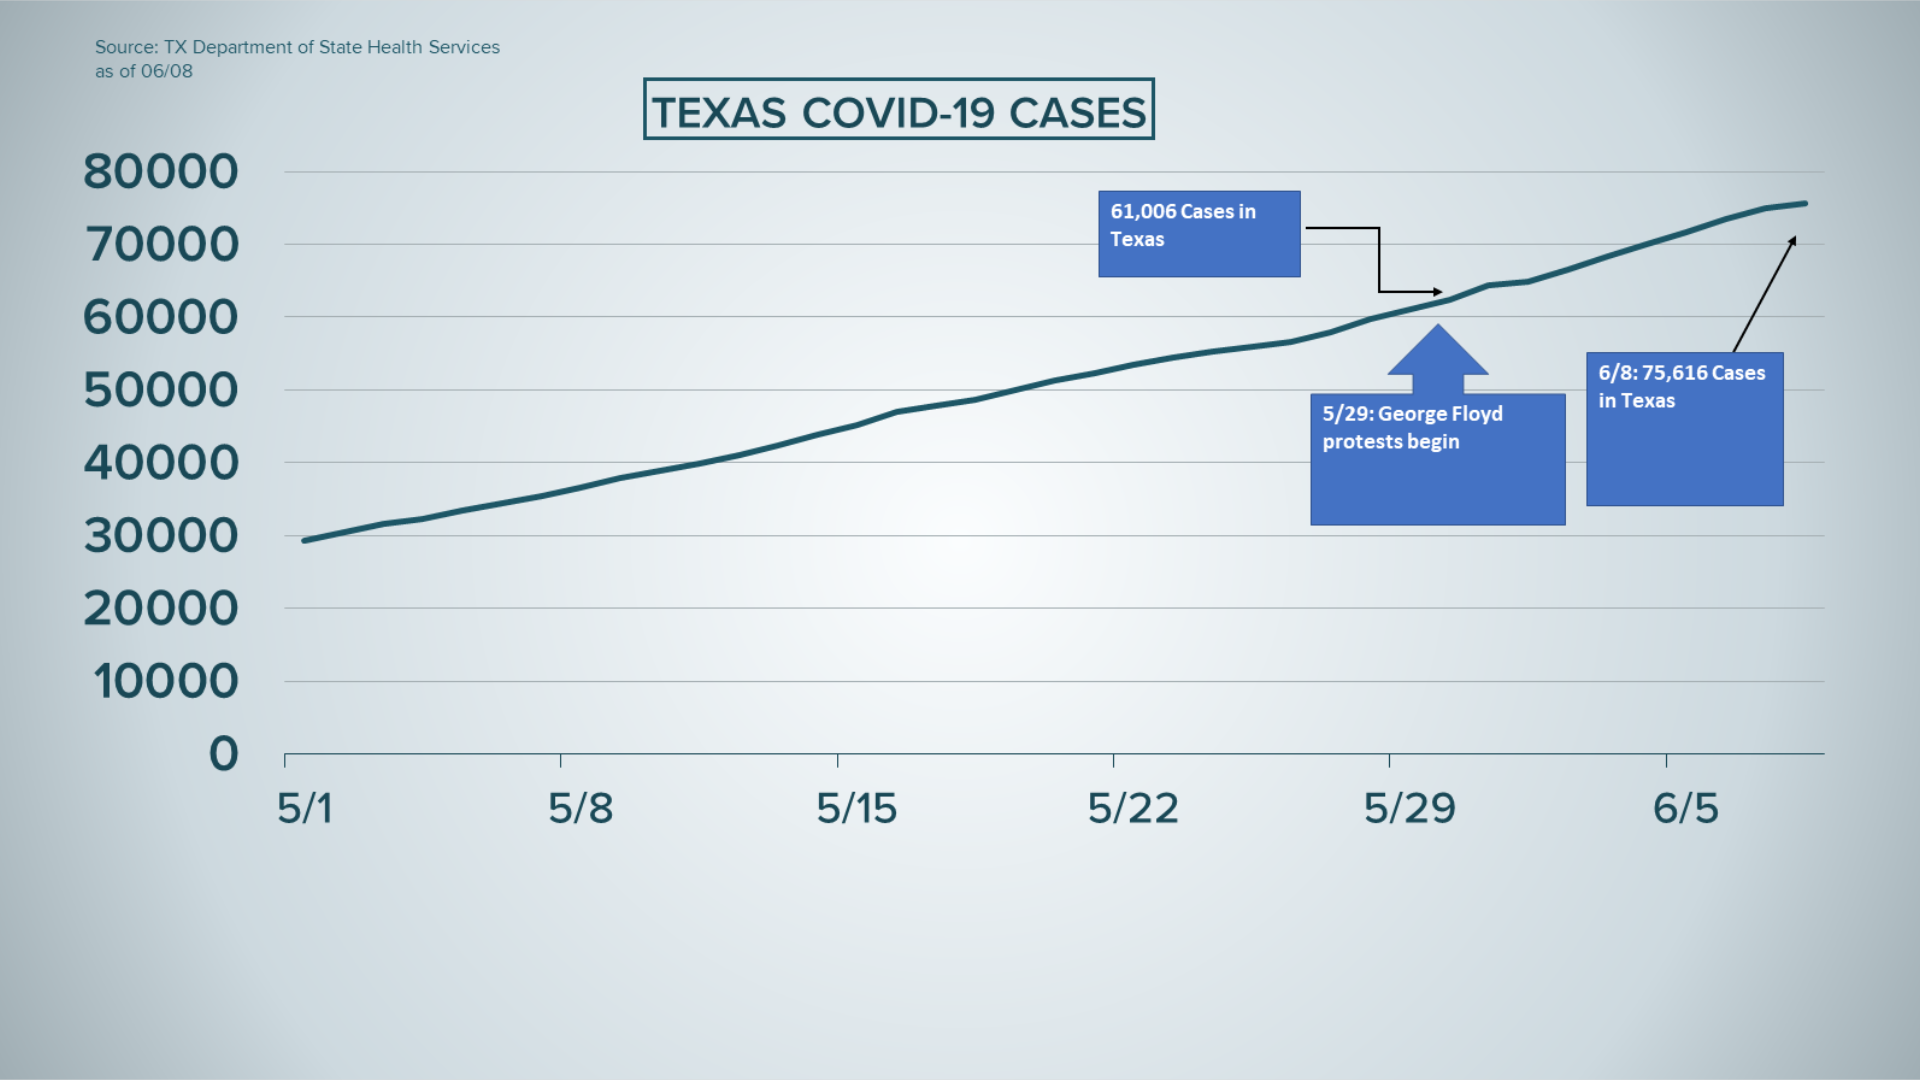 There has been an update in COVID-19 cases in the last few days.